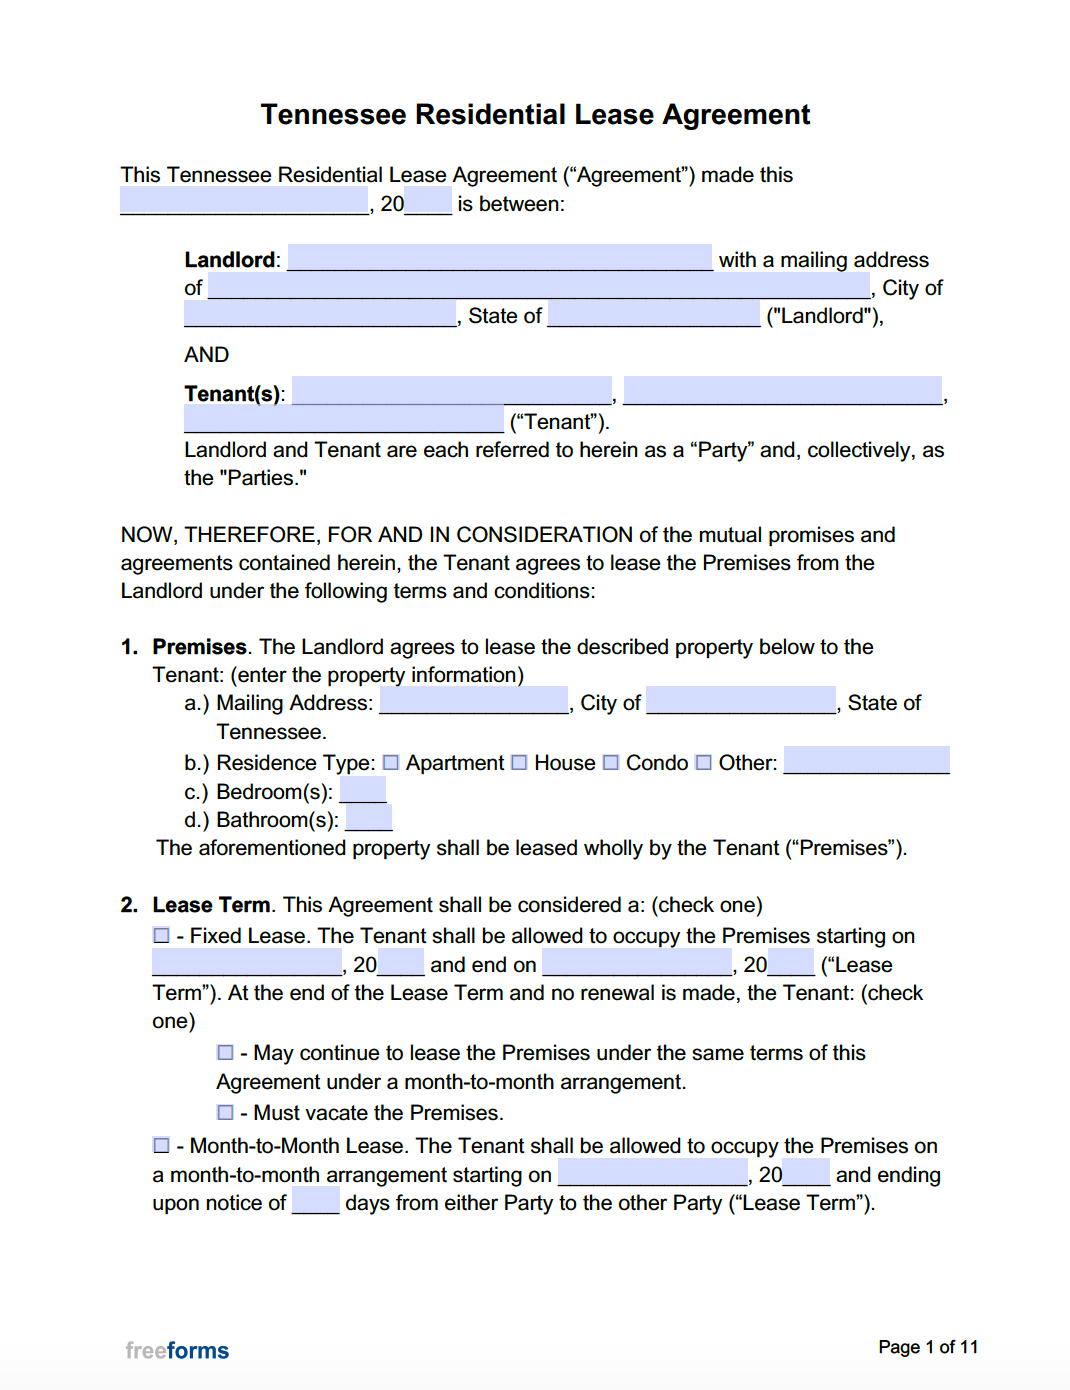 assignment of residential lease